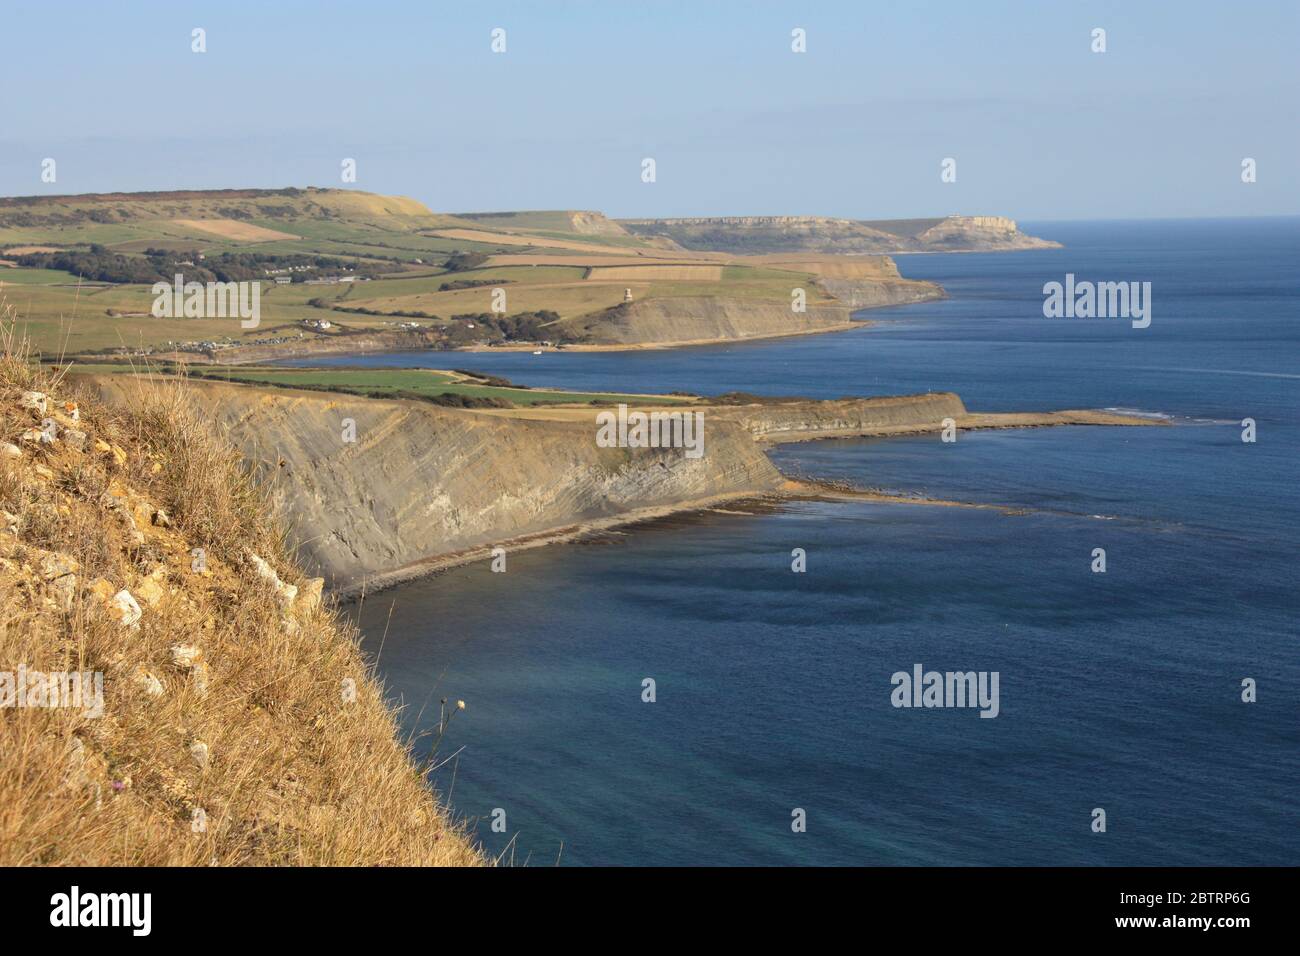 The Jurassic Coast in Dorset, England looking across Broad Bench, Kimmeridge Bay and on towards St Alban's Head from the South West Coast Path Stock Photo